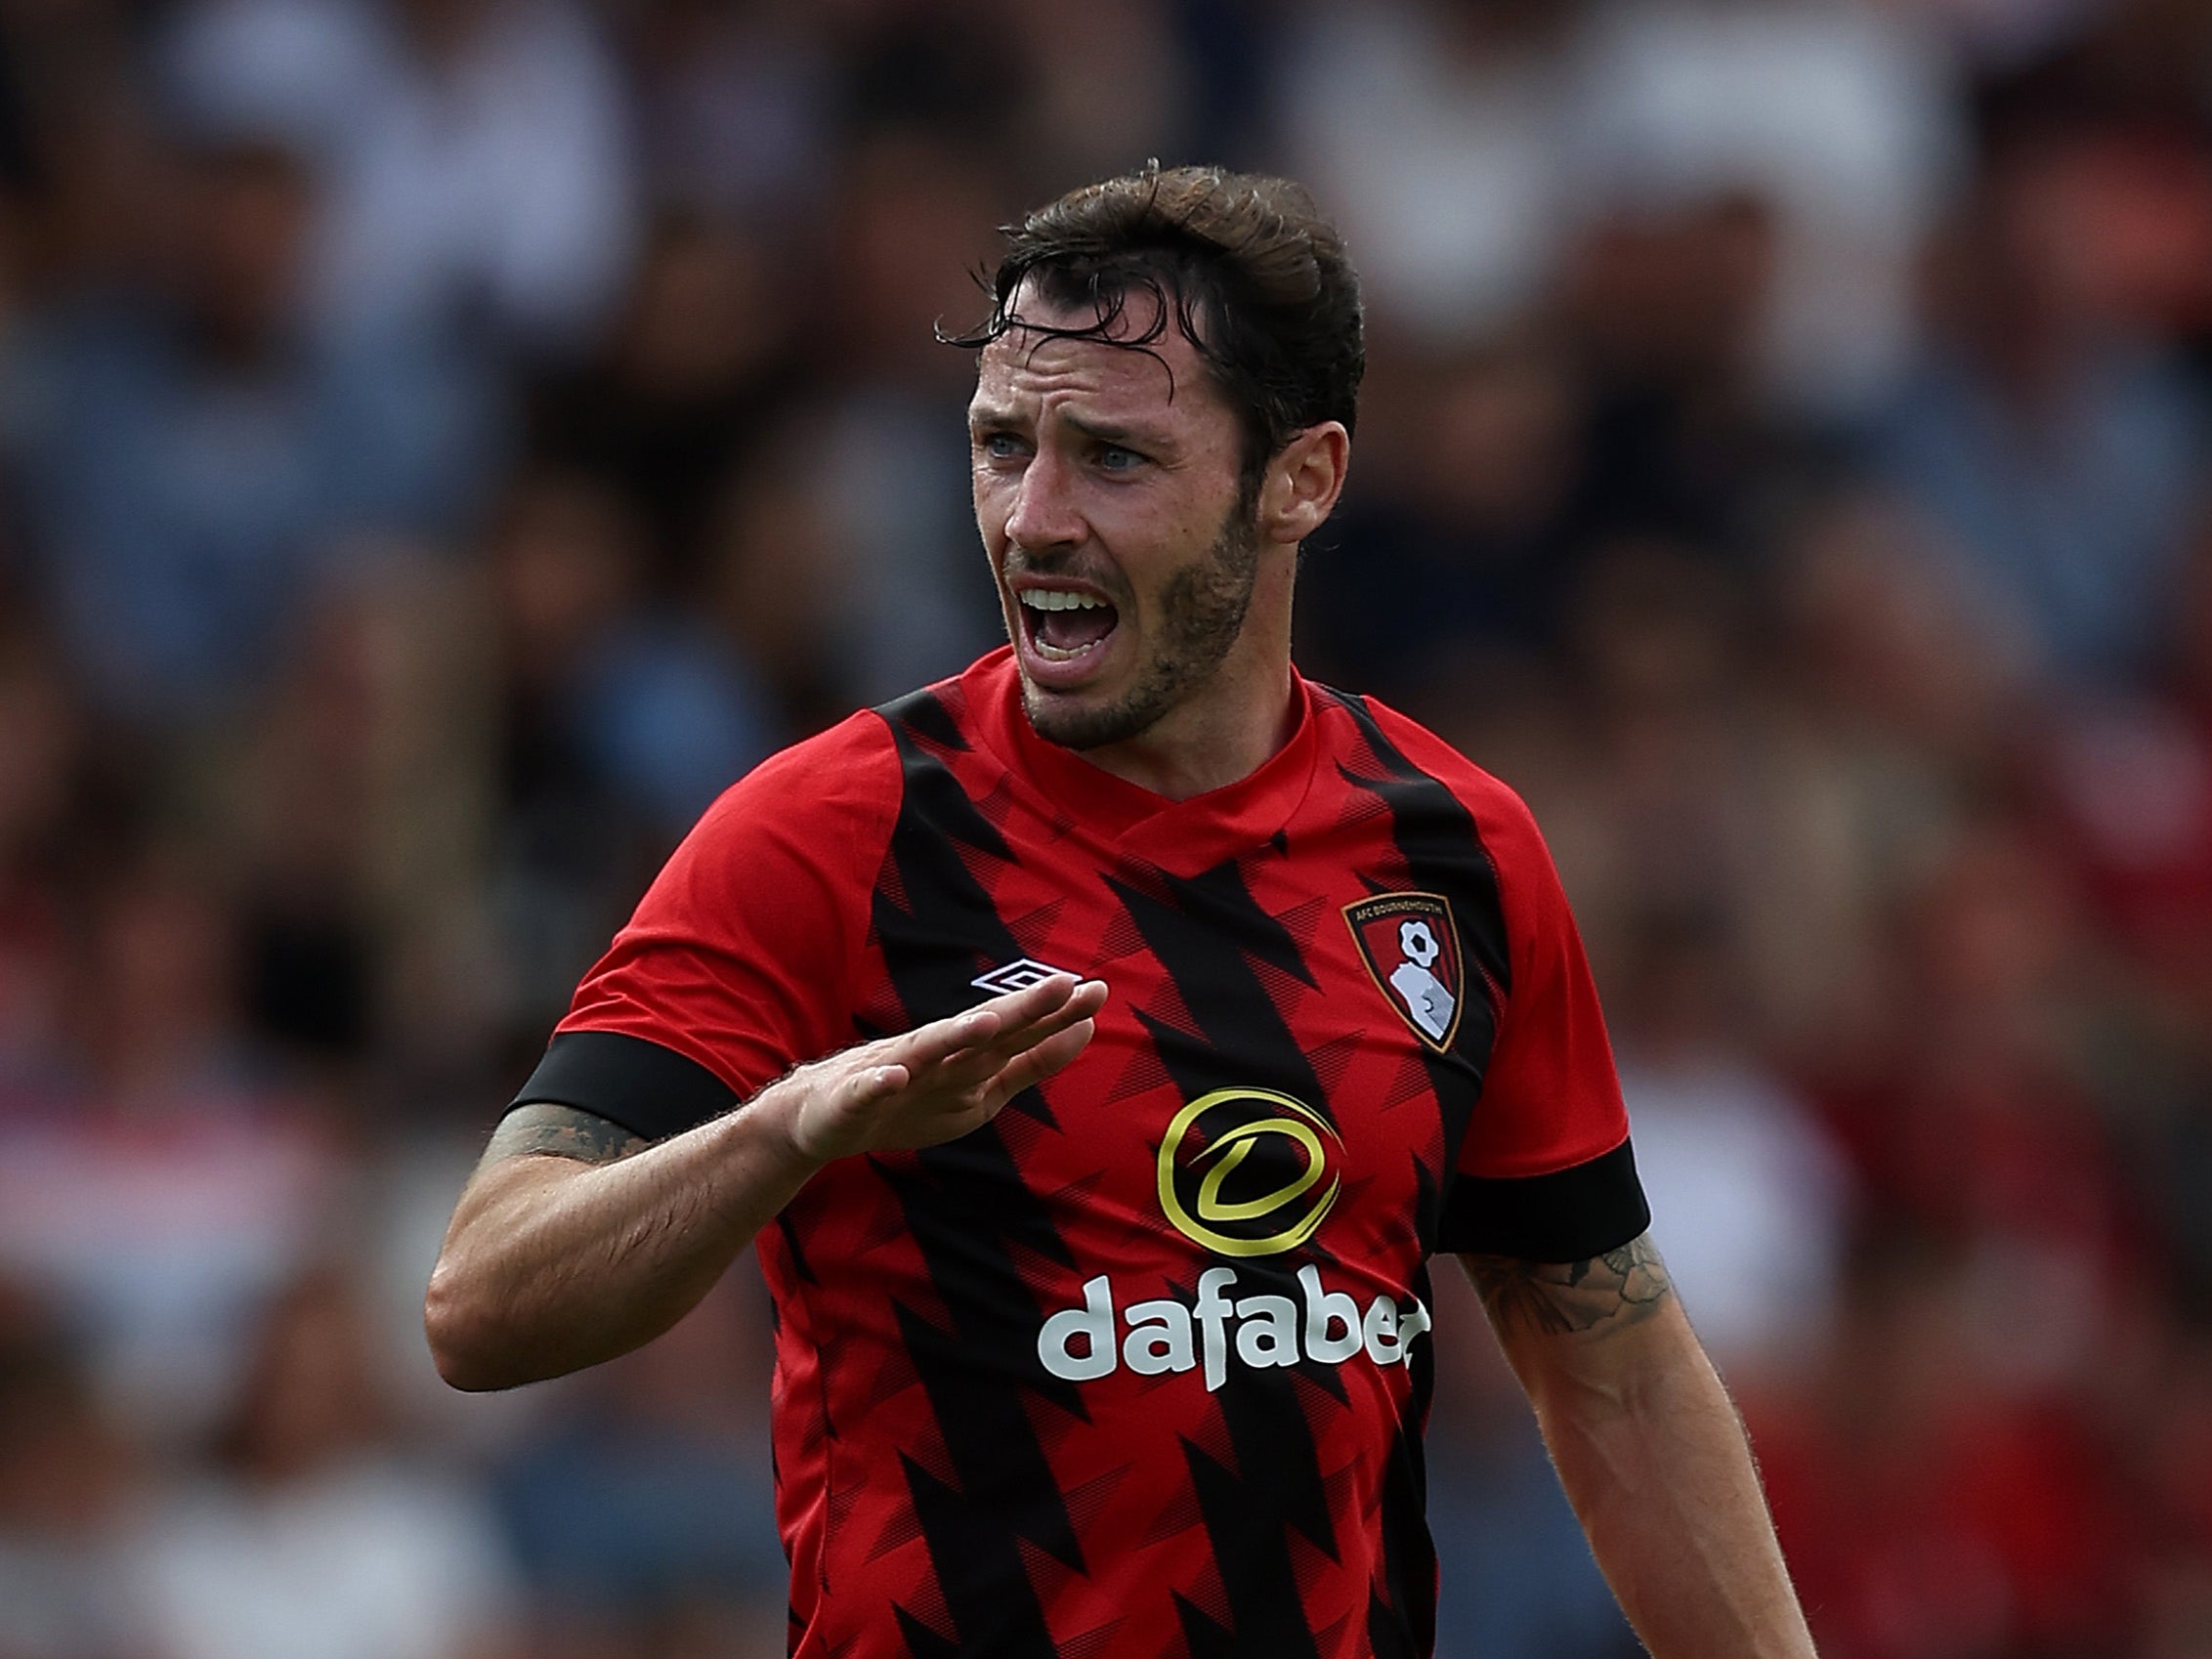 The 31-year-old full-back is the longest-serving member of the Cherries’ squad